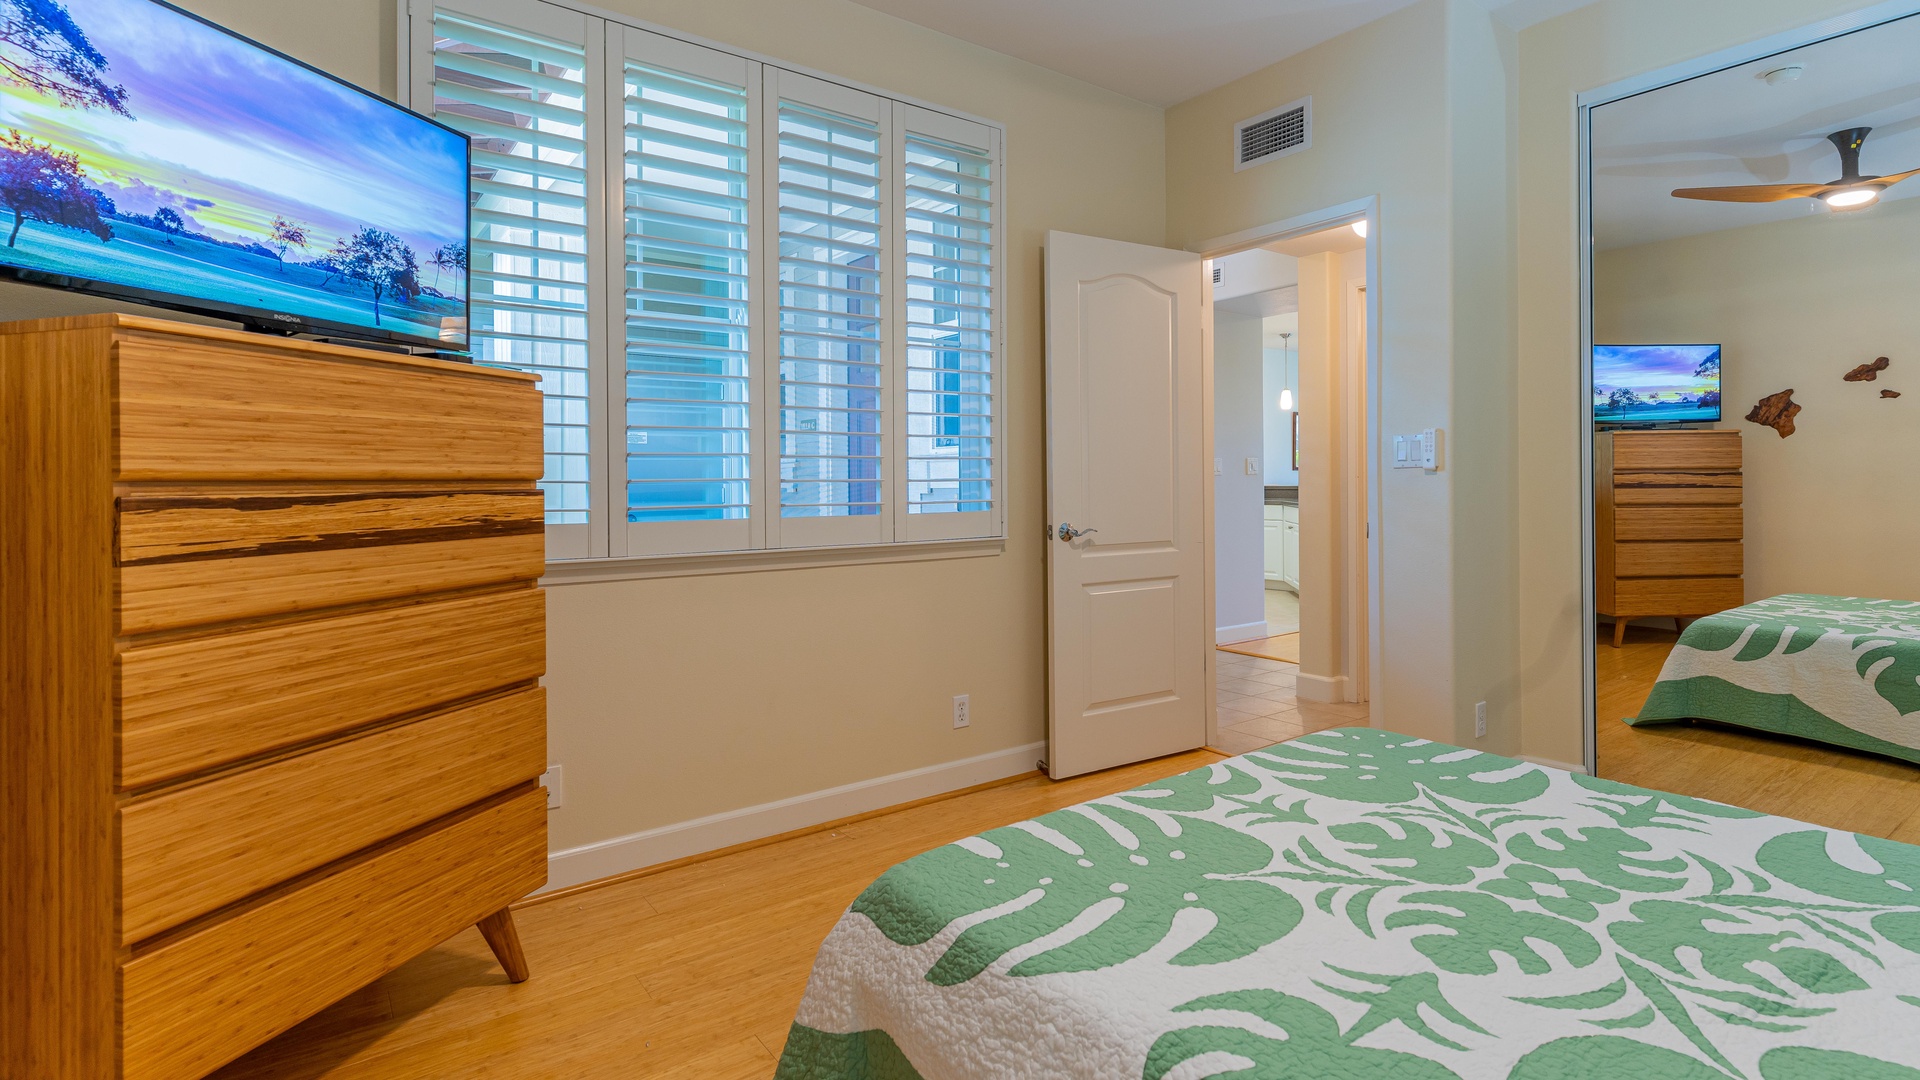 Kapolei Vacation Rentals, Ko Olina Kai 1083C - The downstairs guest bedroom featuring a dresser and soft linens.